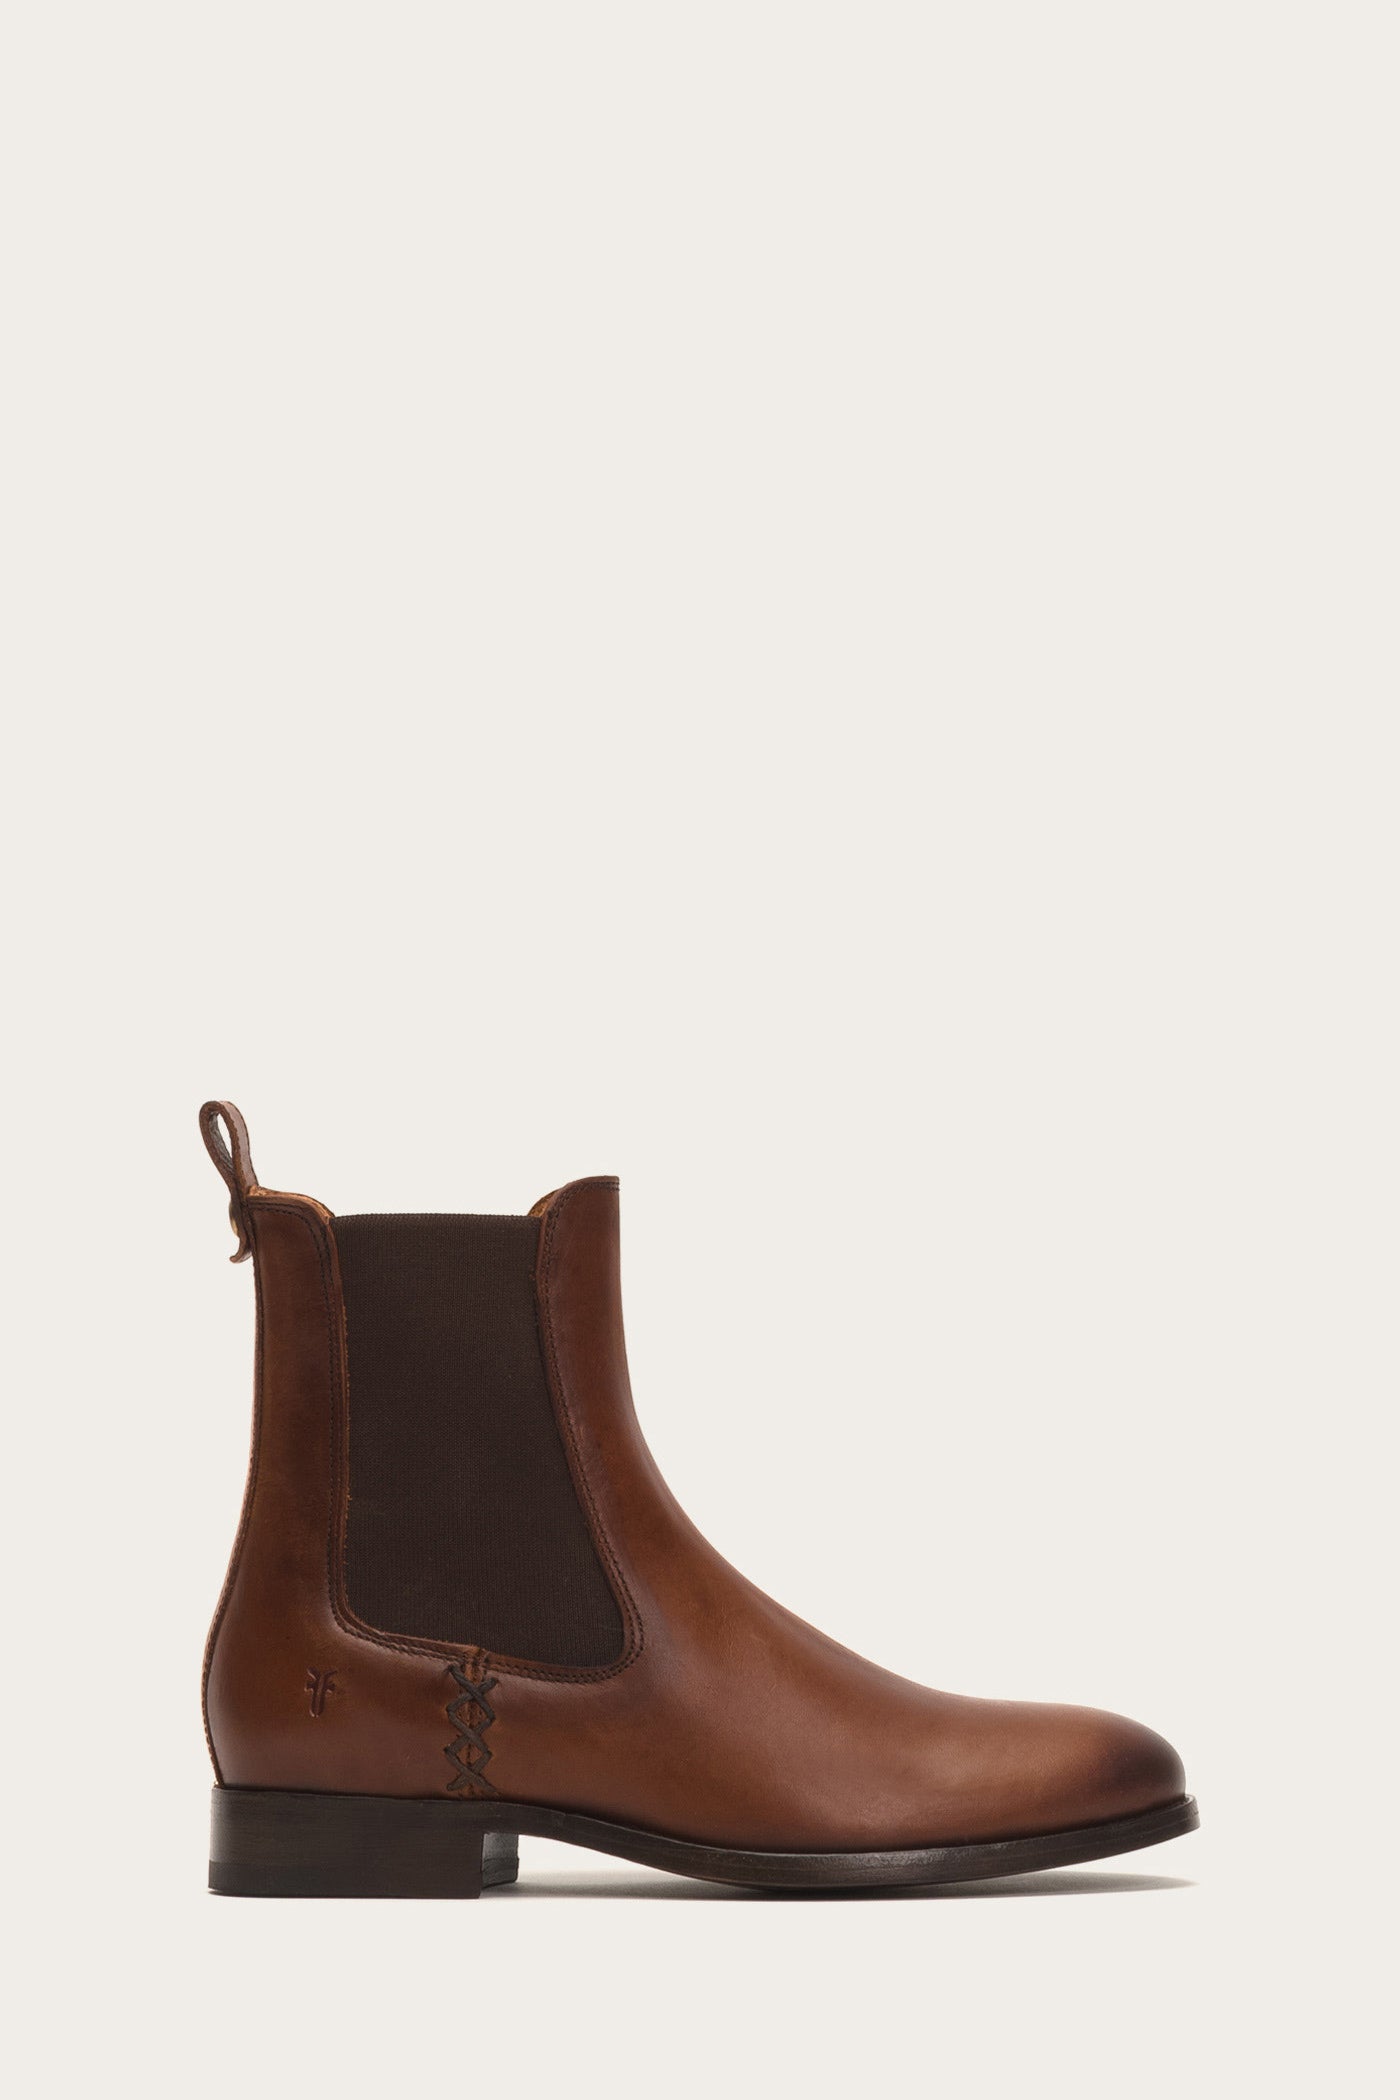 frye melissa leather chelsea boots